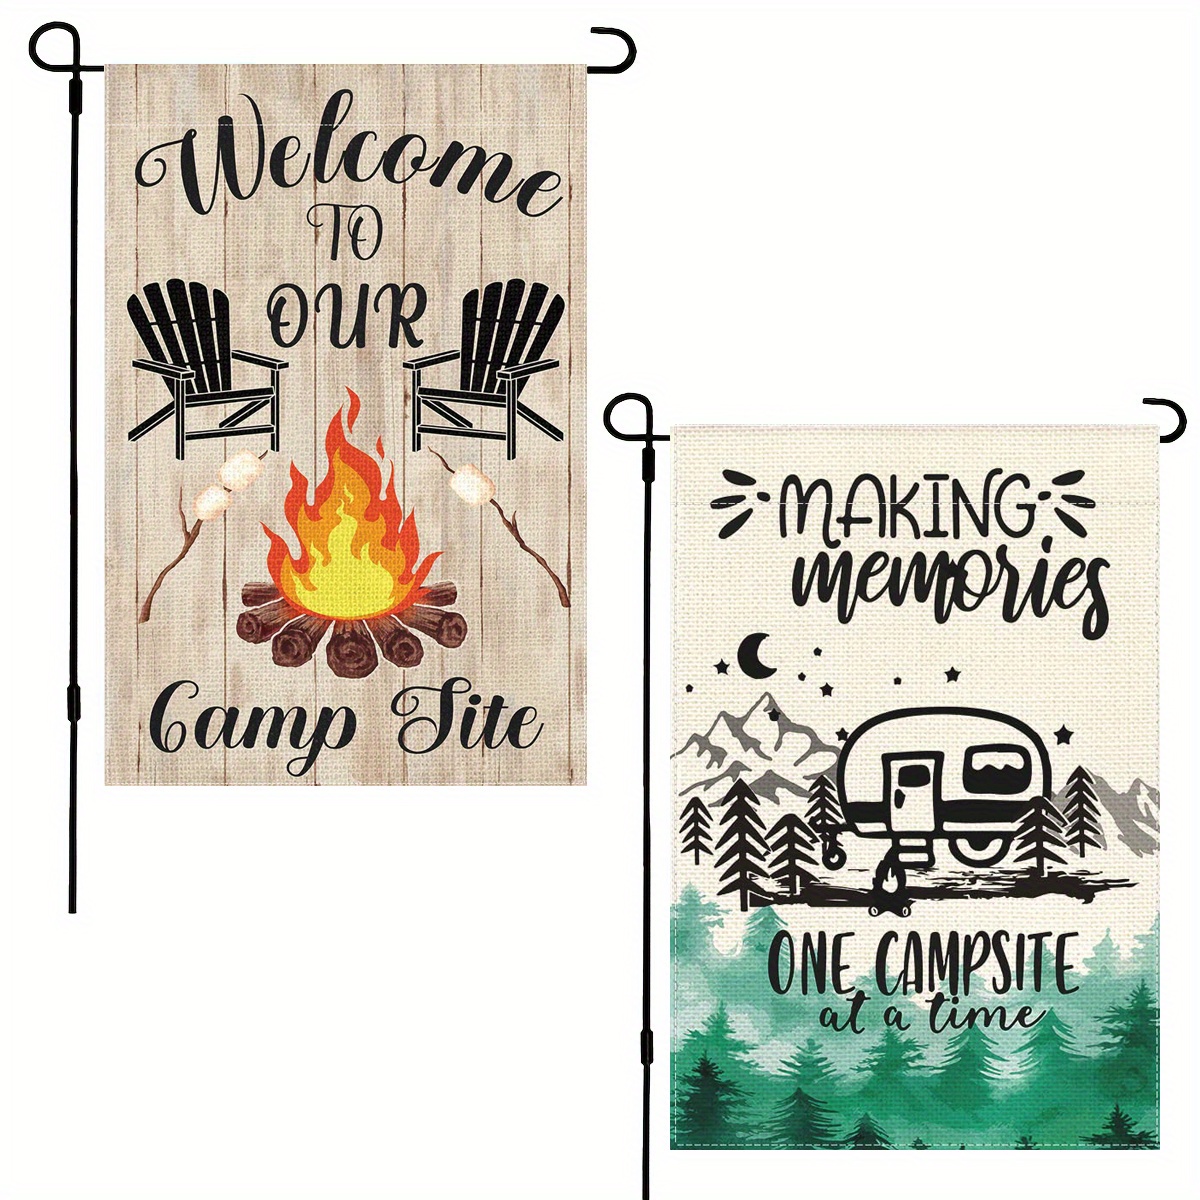 

2pcs, Spring Summer Camping Garden Flag, Welcome To Our Camp Site Camping Flags, Home Decor, Outdoor Decor, Yard Decor, Garden Decorations, Patio Decor, Lawn Decor, No Flagpole 12x18in